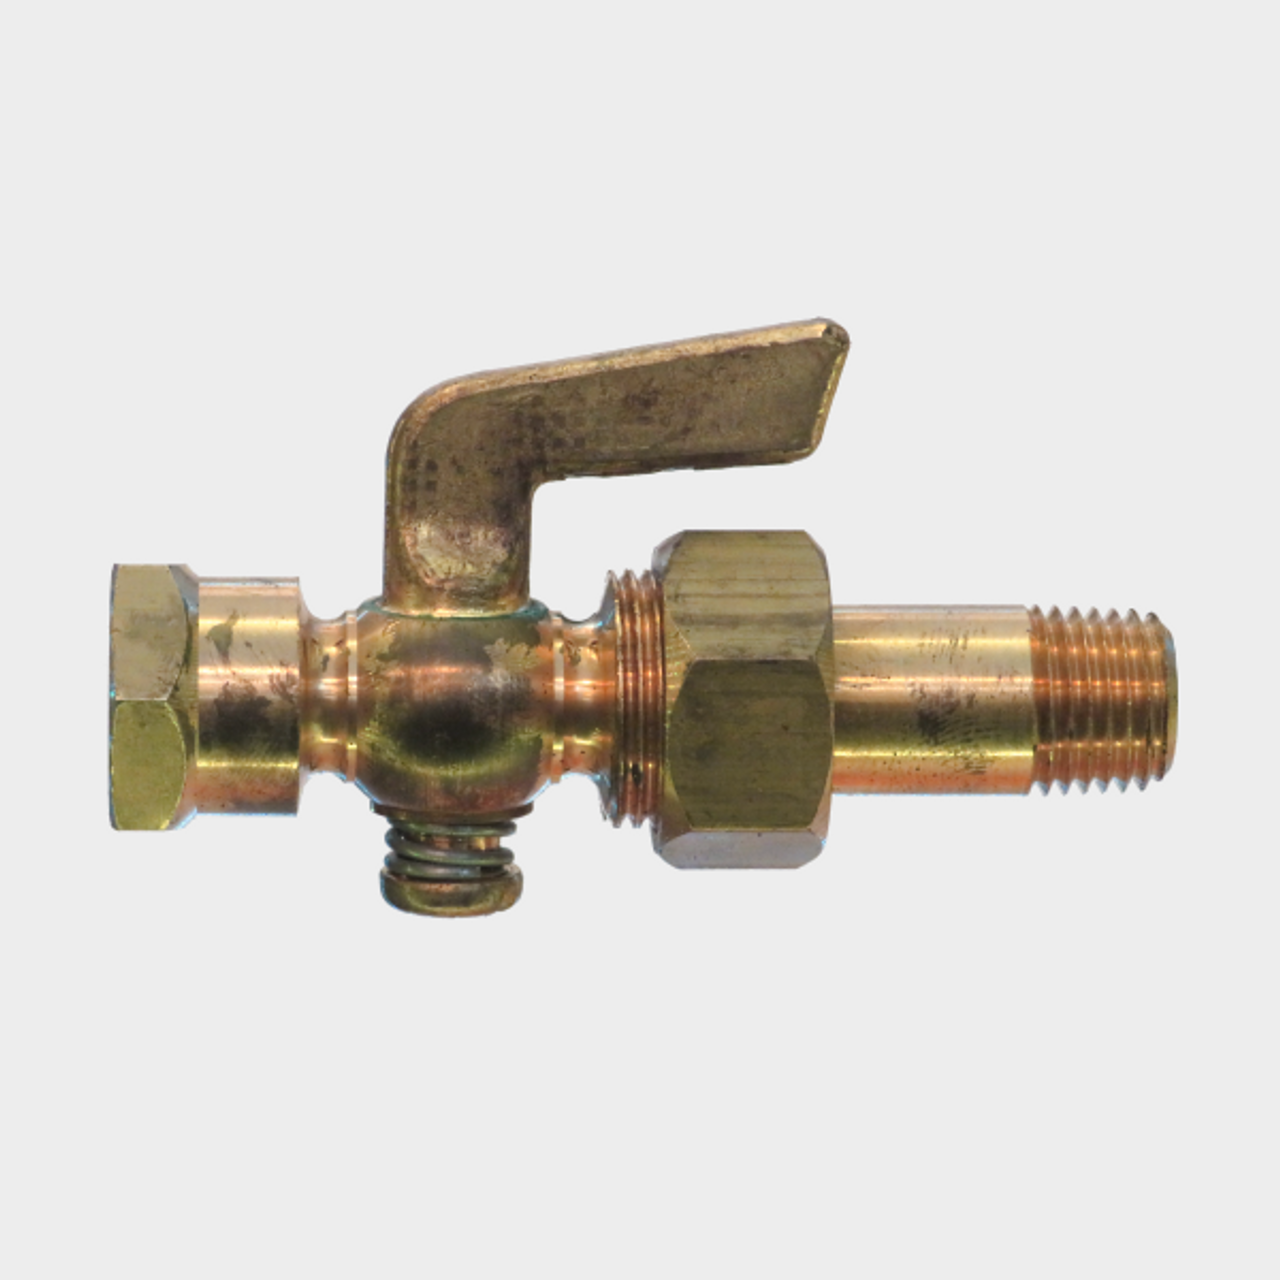 Lever Handle - Female with Male Union